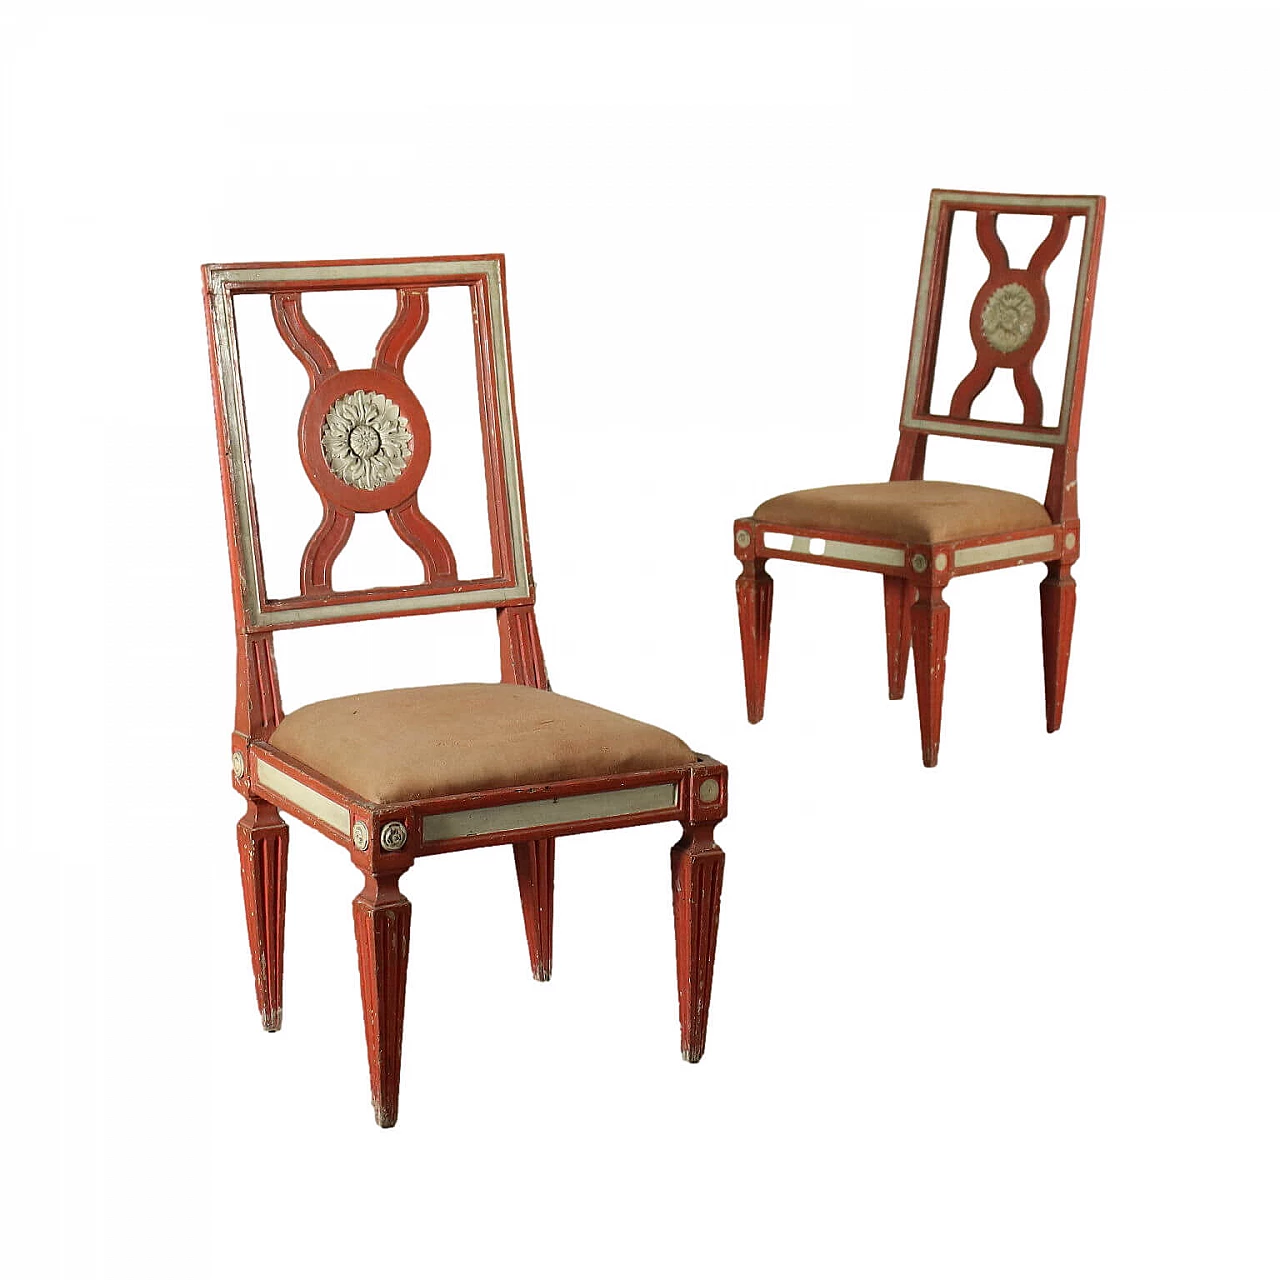 Pair of Neoclassical chairs, 18th century 1